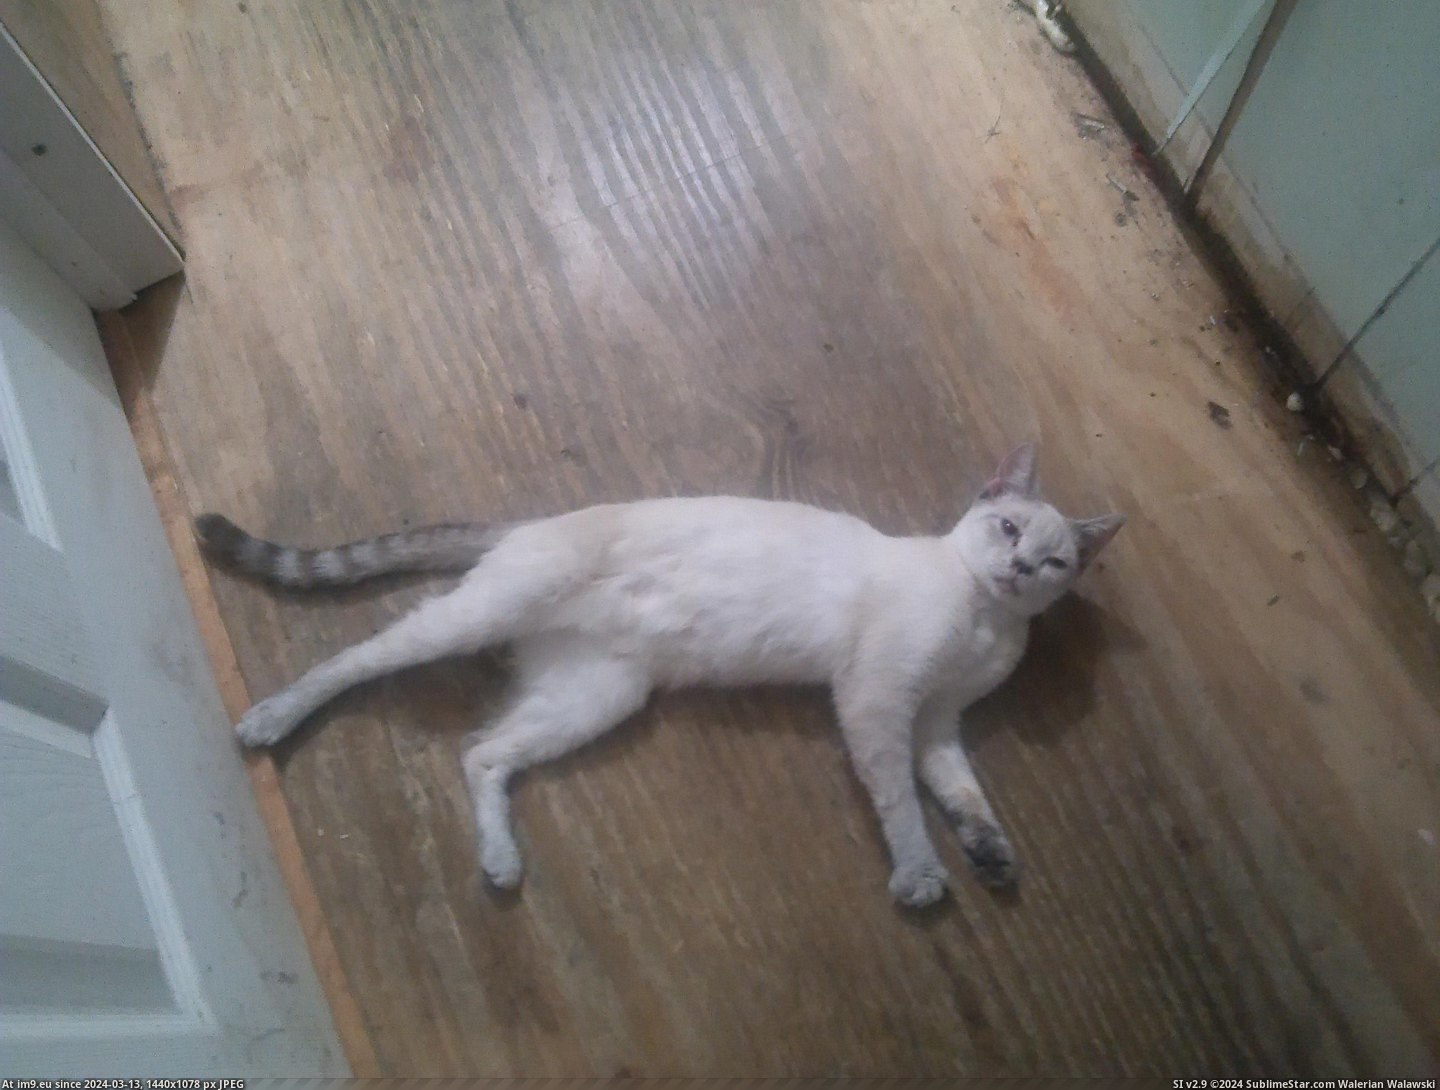 #Cats #Likes #Door #Stretching #Meowing #Sitting #Bedroom #Snowy [Cats] Snowy likes sitting outside of my bedroom door, meowing and stretching at the door until I open the door 8 Pic. (Obraz z album My r/CATS favs))